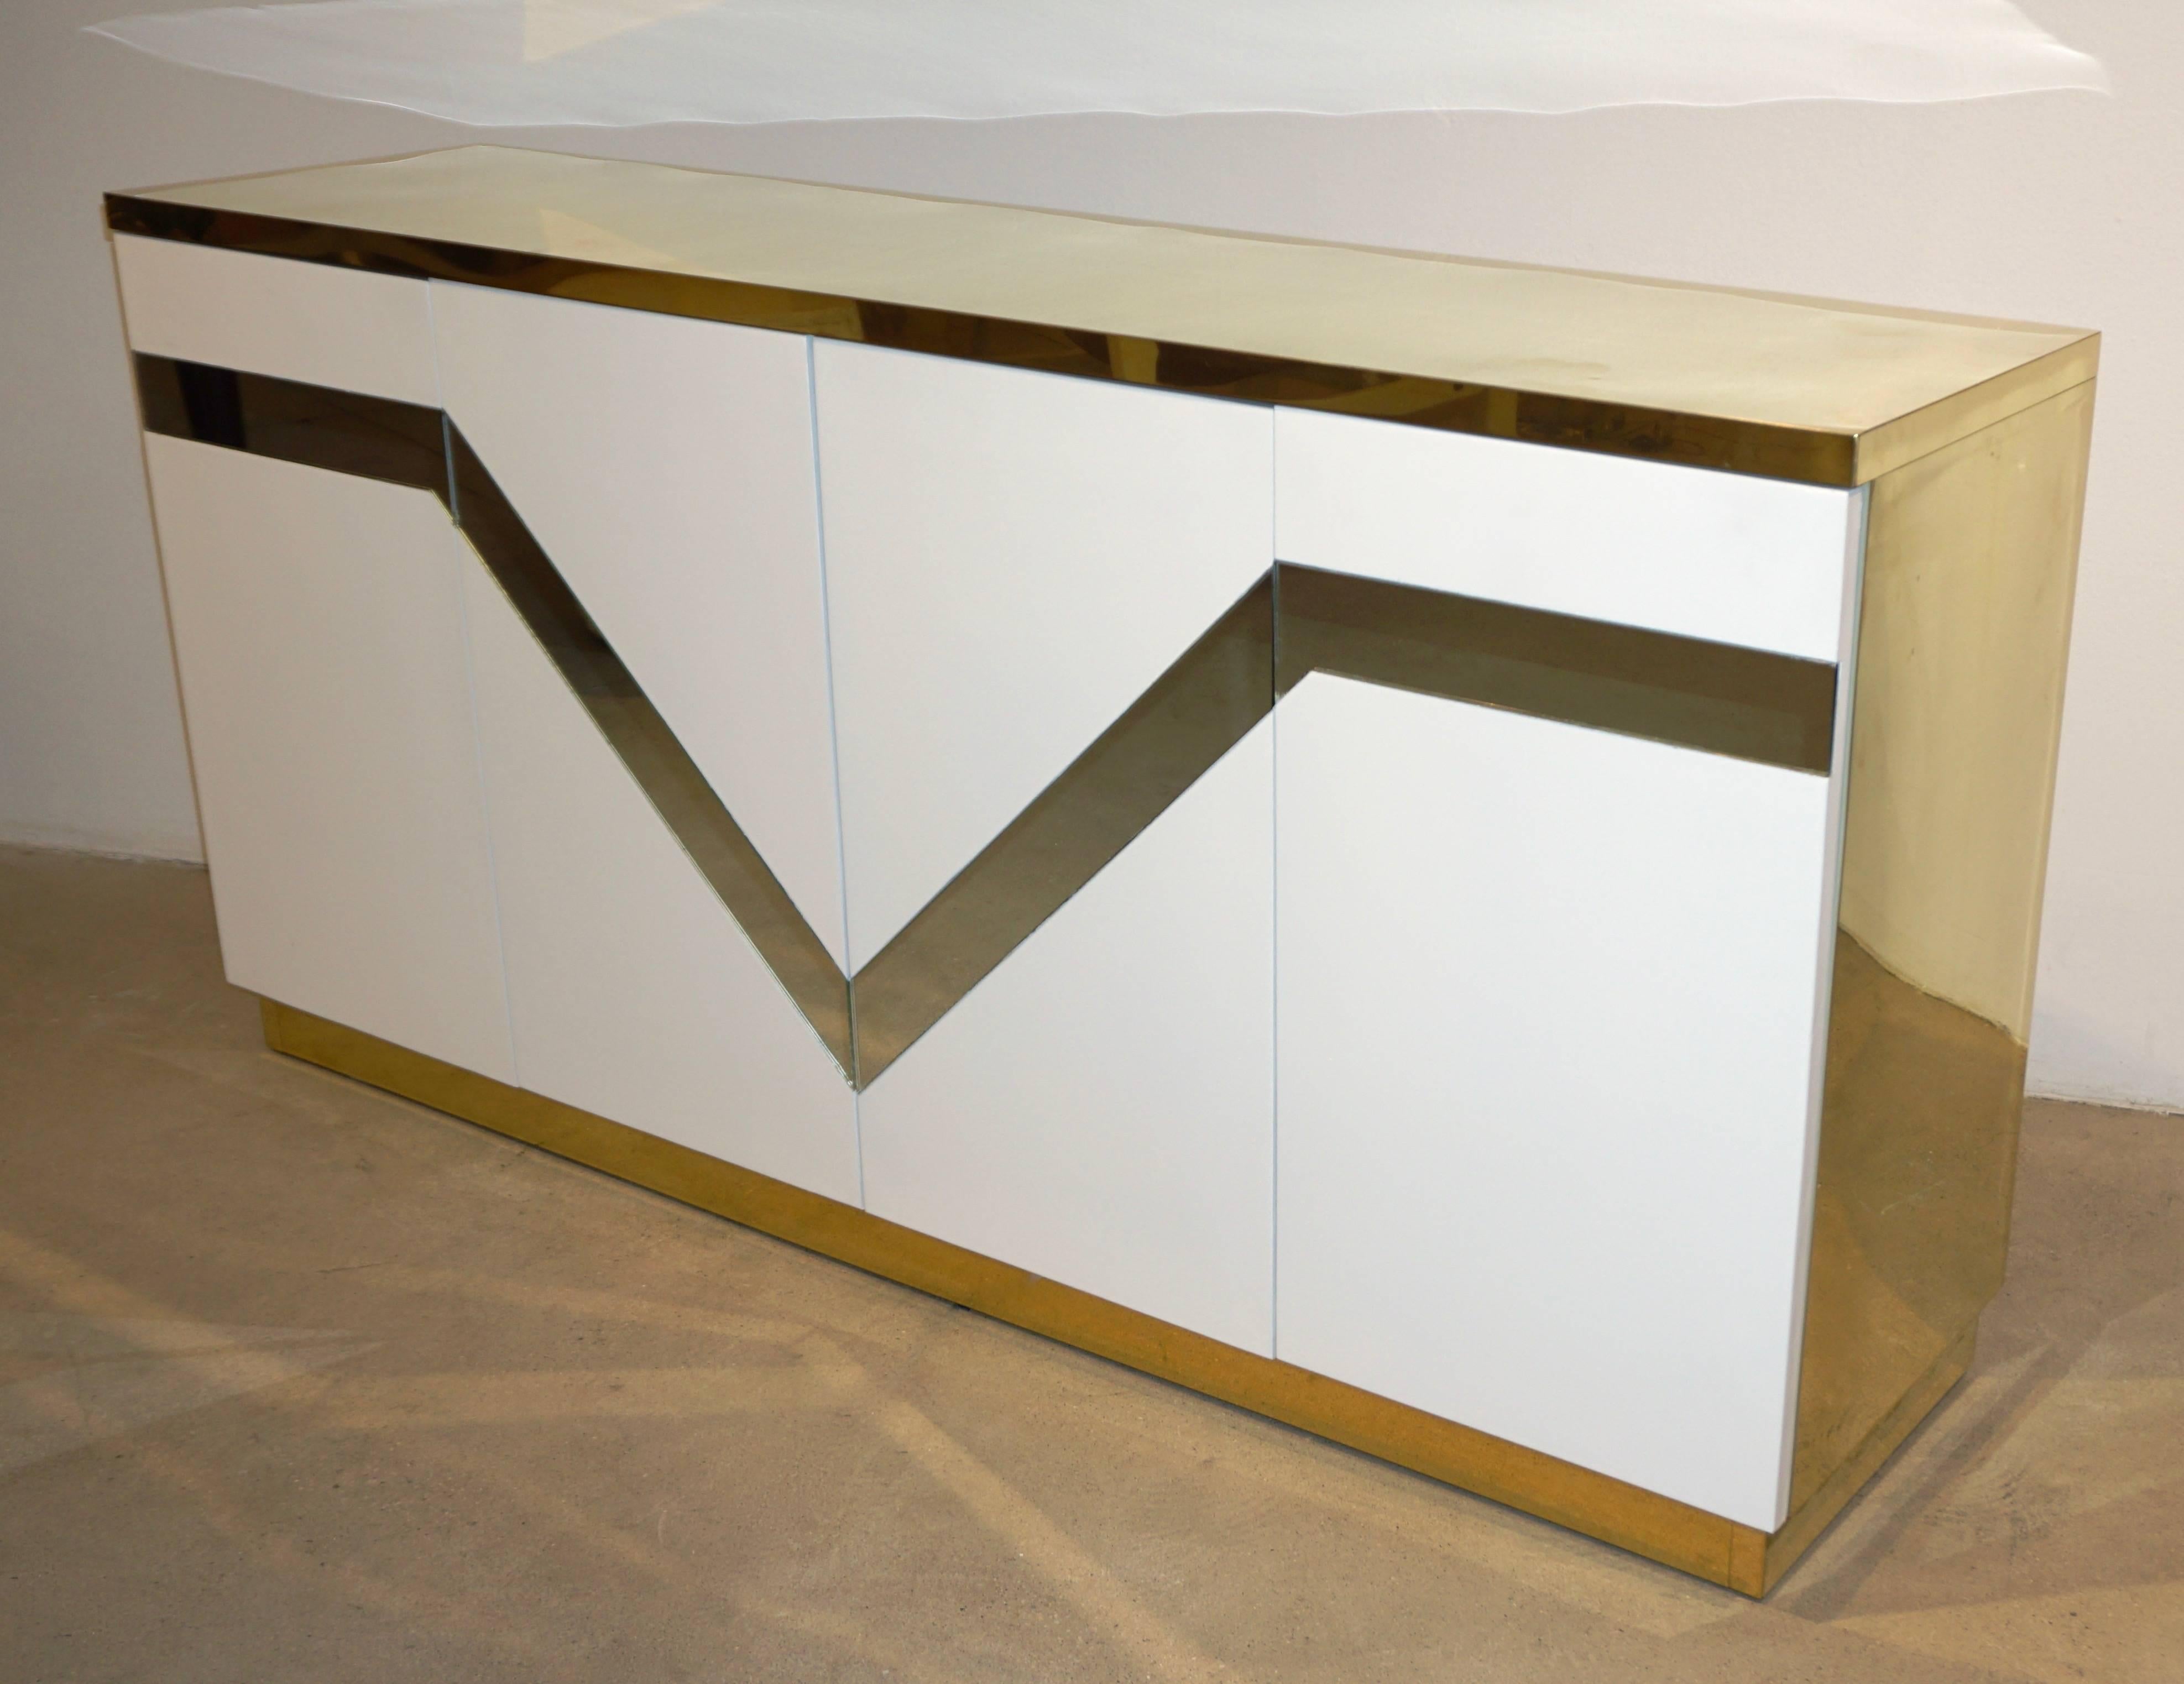 A unique Italian modern geometric design for this sideboard / cabinet, with the great advantage of a shallow body, by the Architect Sandro Petti for L' Angolo Metallarte, 1970s, Rome. Characteristic of the work of Sandro Petti is his Haute Couture